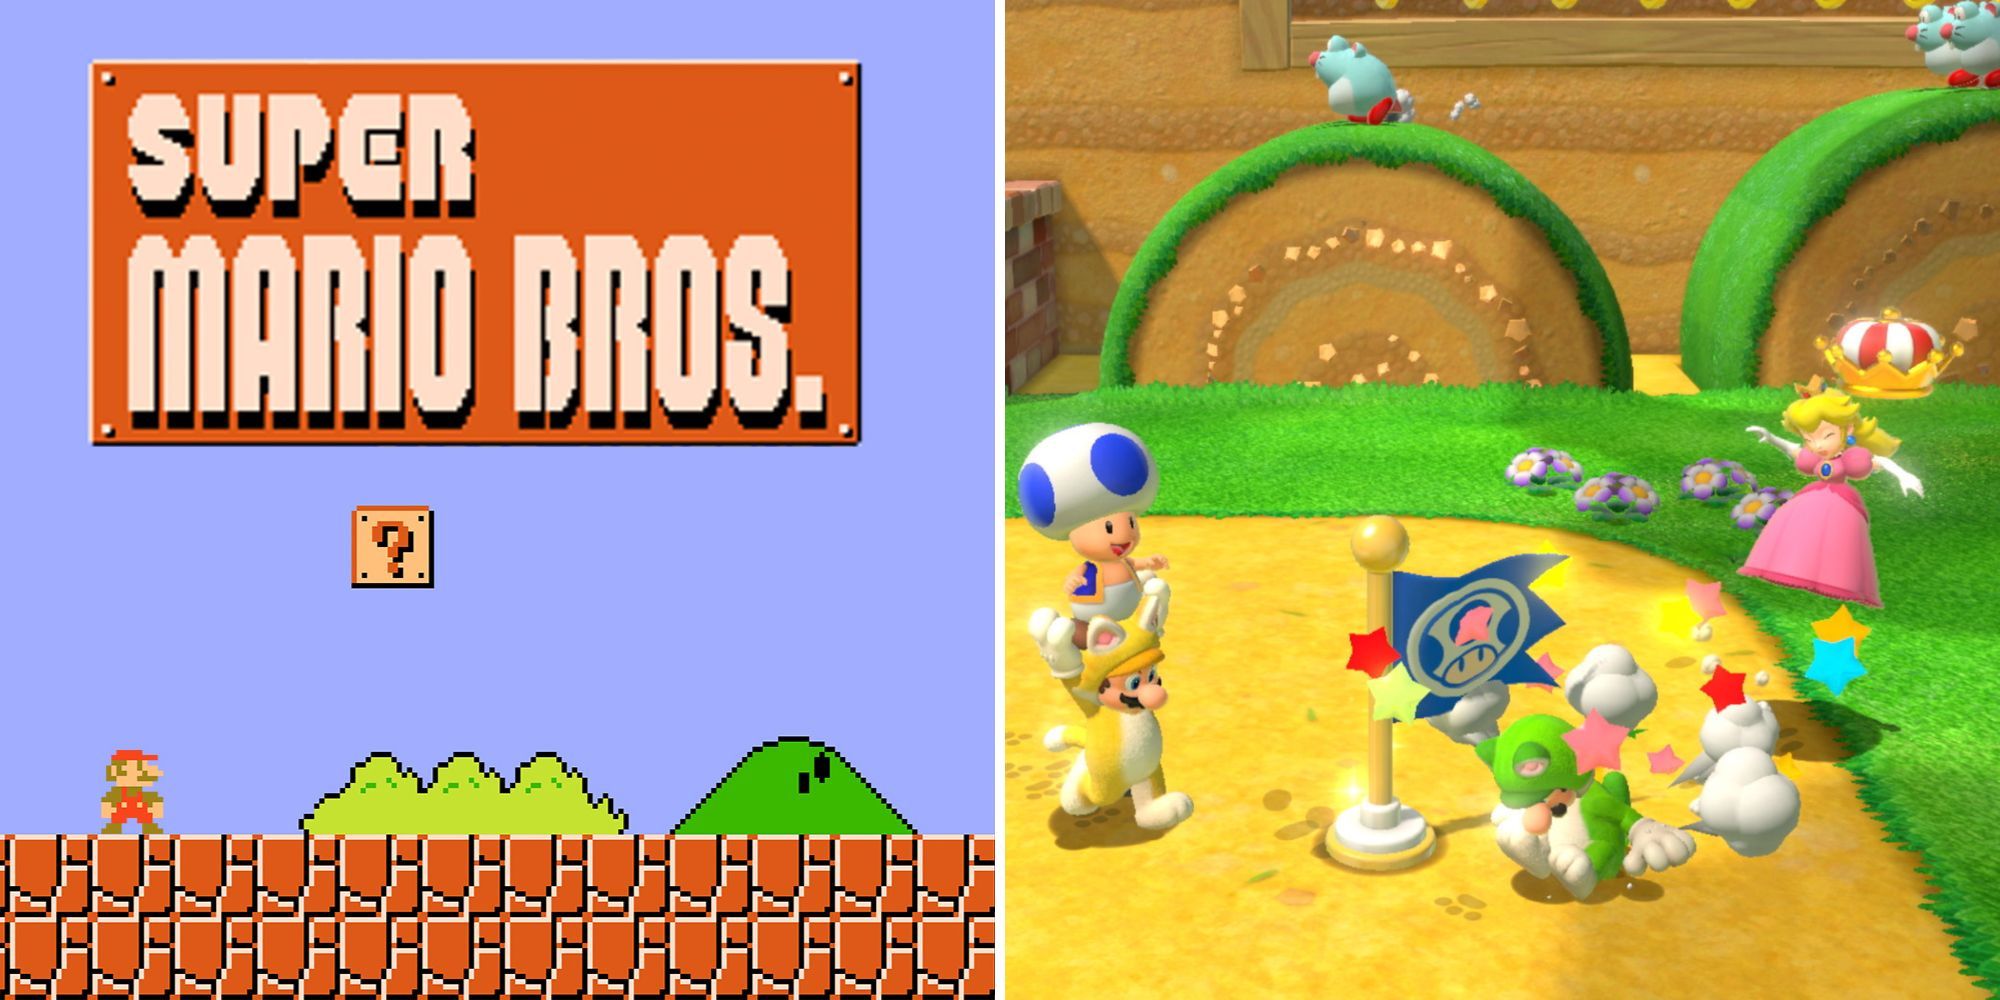 First image shows the original Super Mario Bros and the second image shows several characters dashing and holding each other in Super Mario 3D World